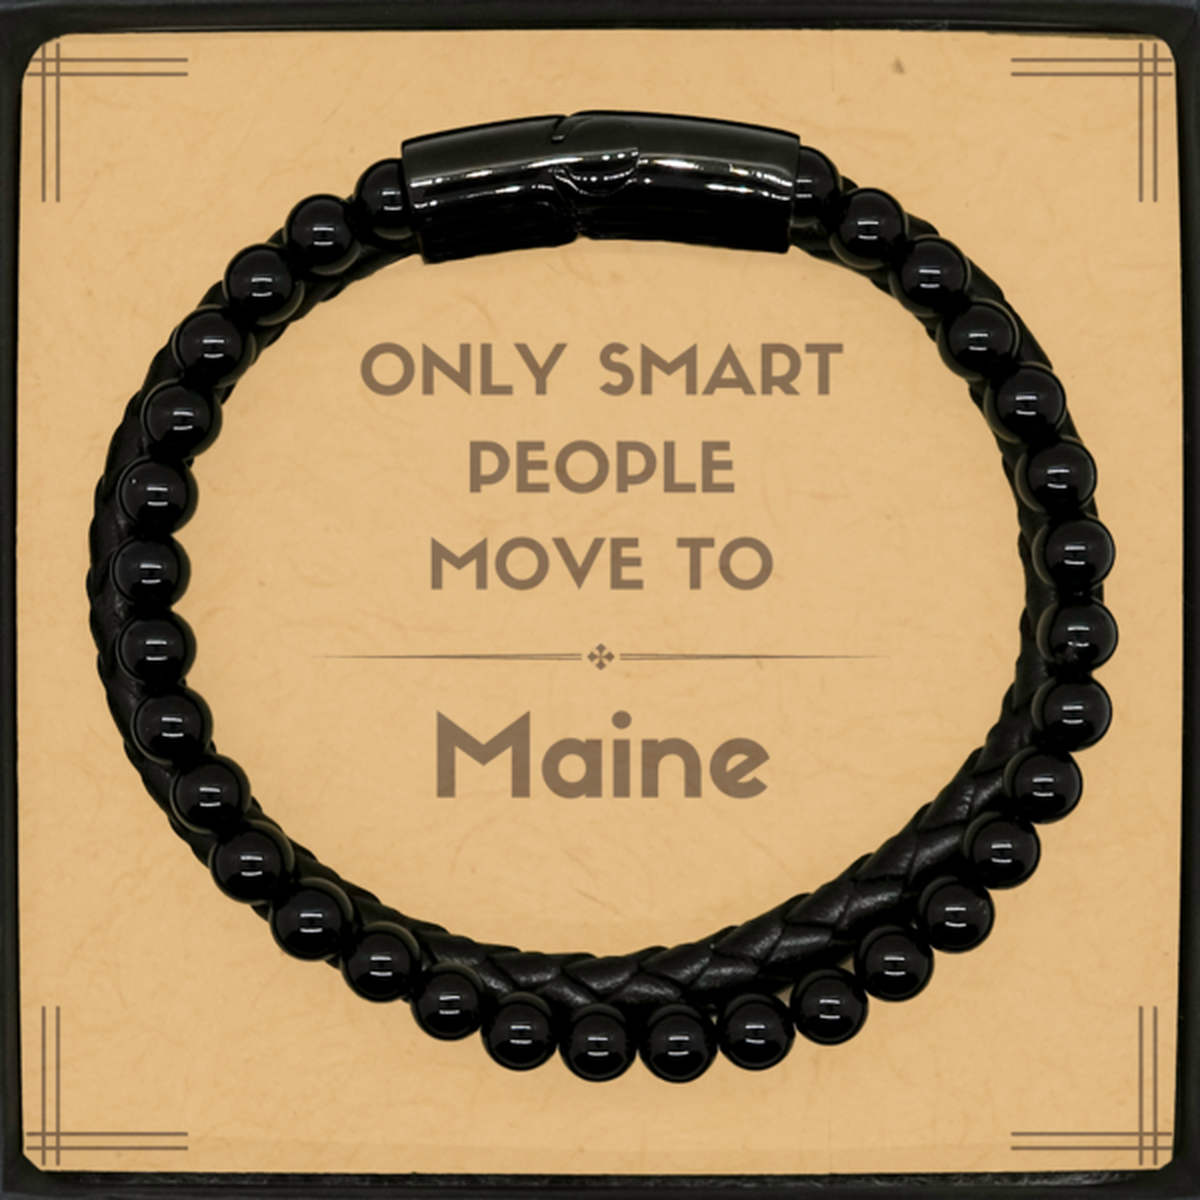 Only smart people move to Maine Stone Leather Bracelets, Message Card Gifts For Maine, Move to Maine Gifts for Friends Coworker Funny Saying Quote